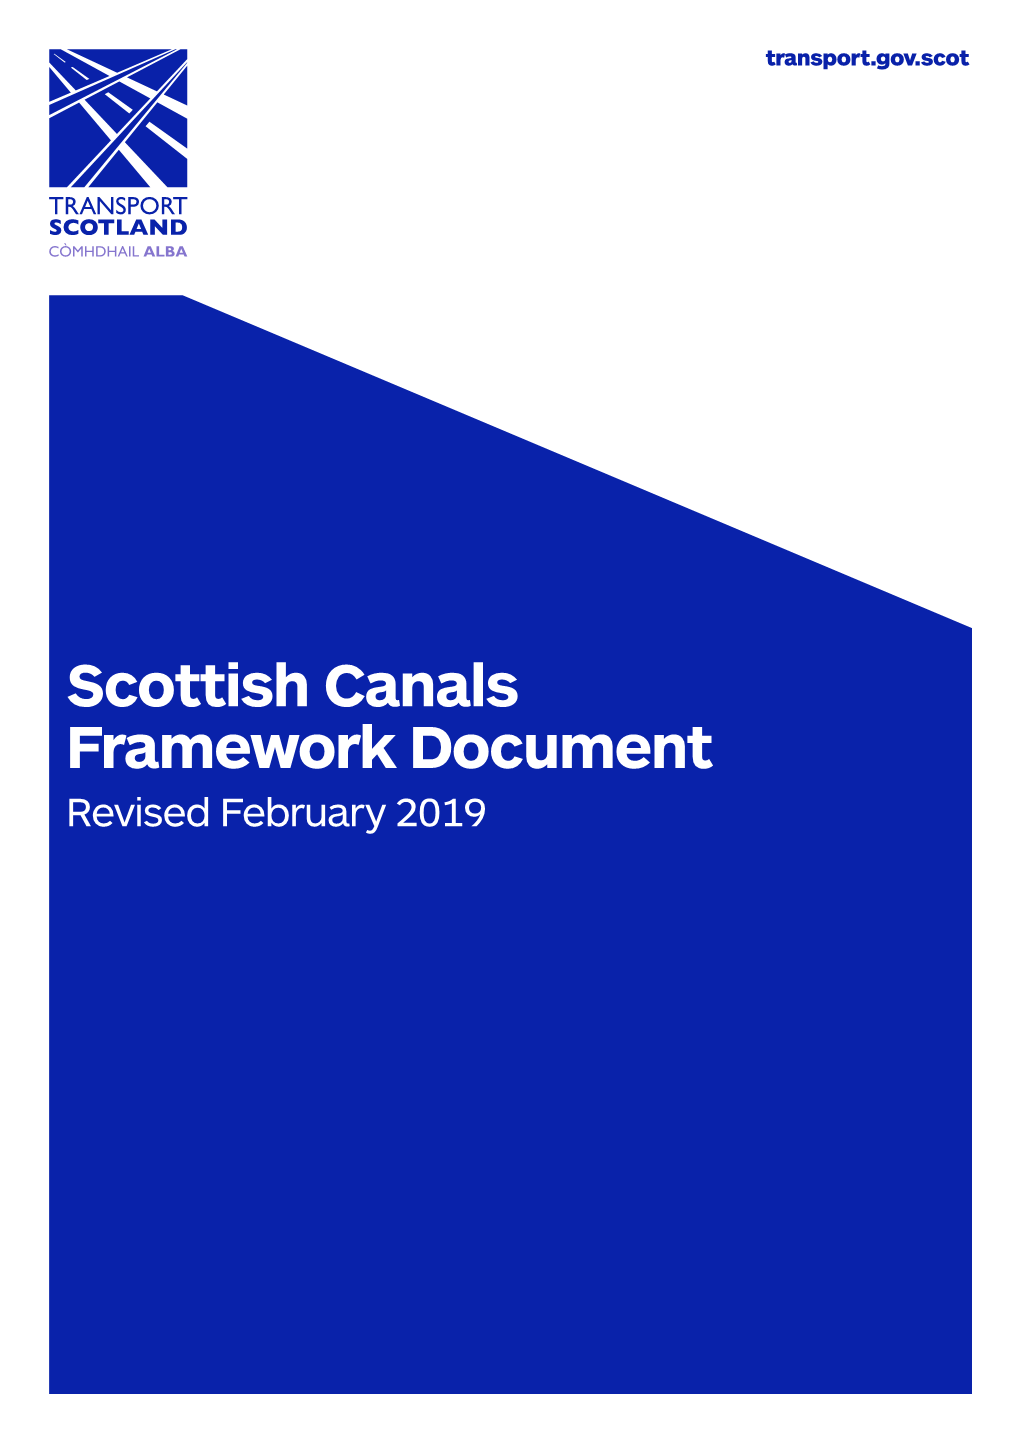 Scottish Canals Framework Document Revised February 2019 Contents Introduction